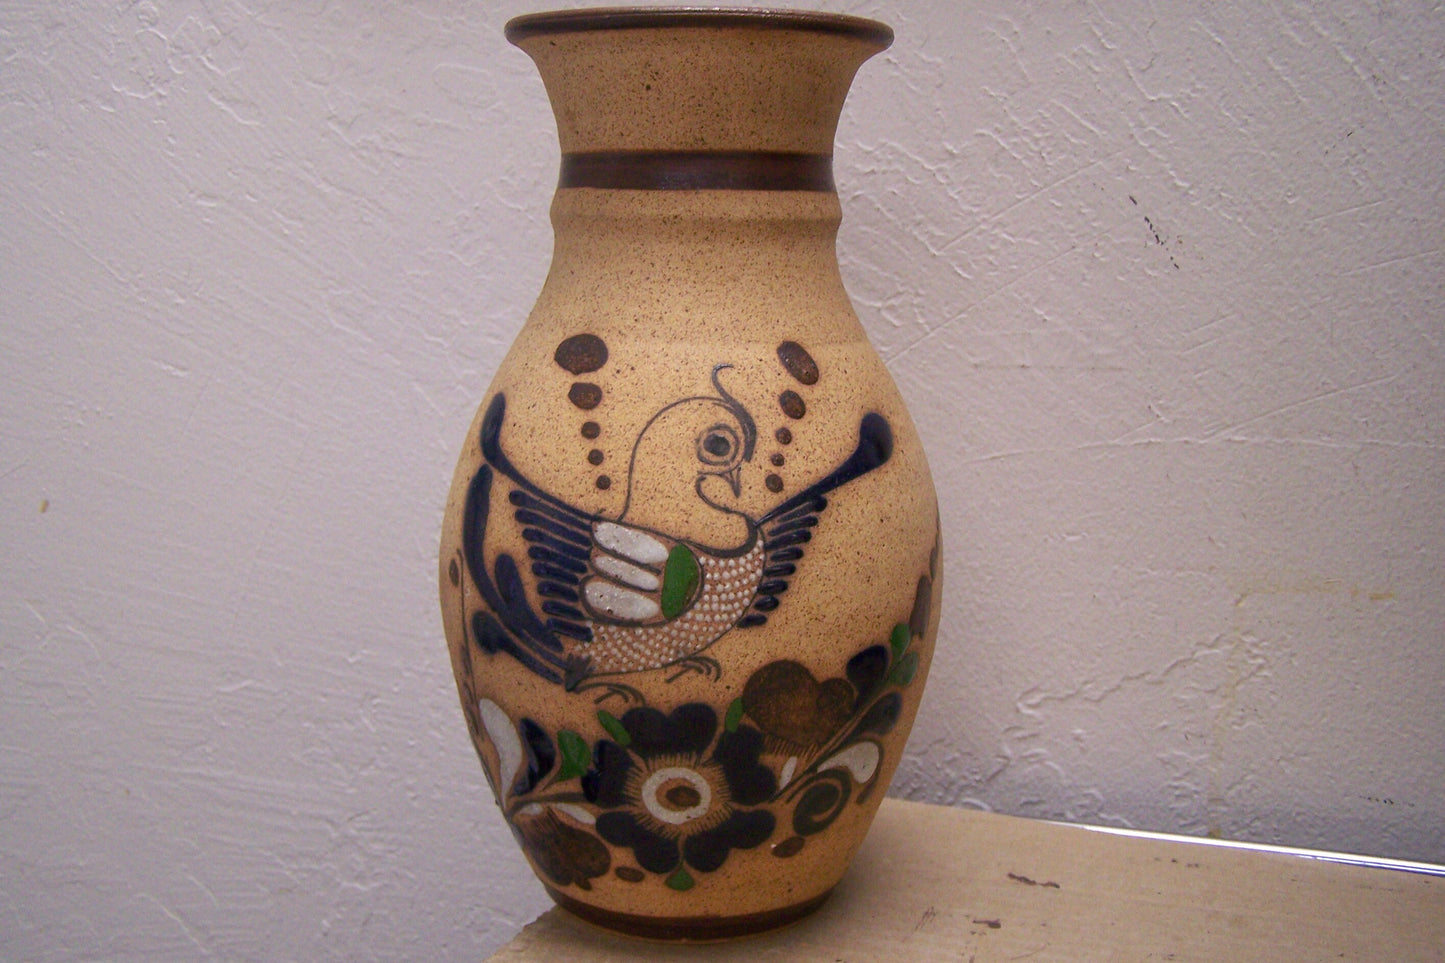 Vintage 1980s Stoneware Vase with Bird and Floral Pattern #1 - Mexico